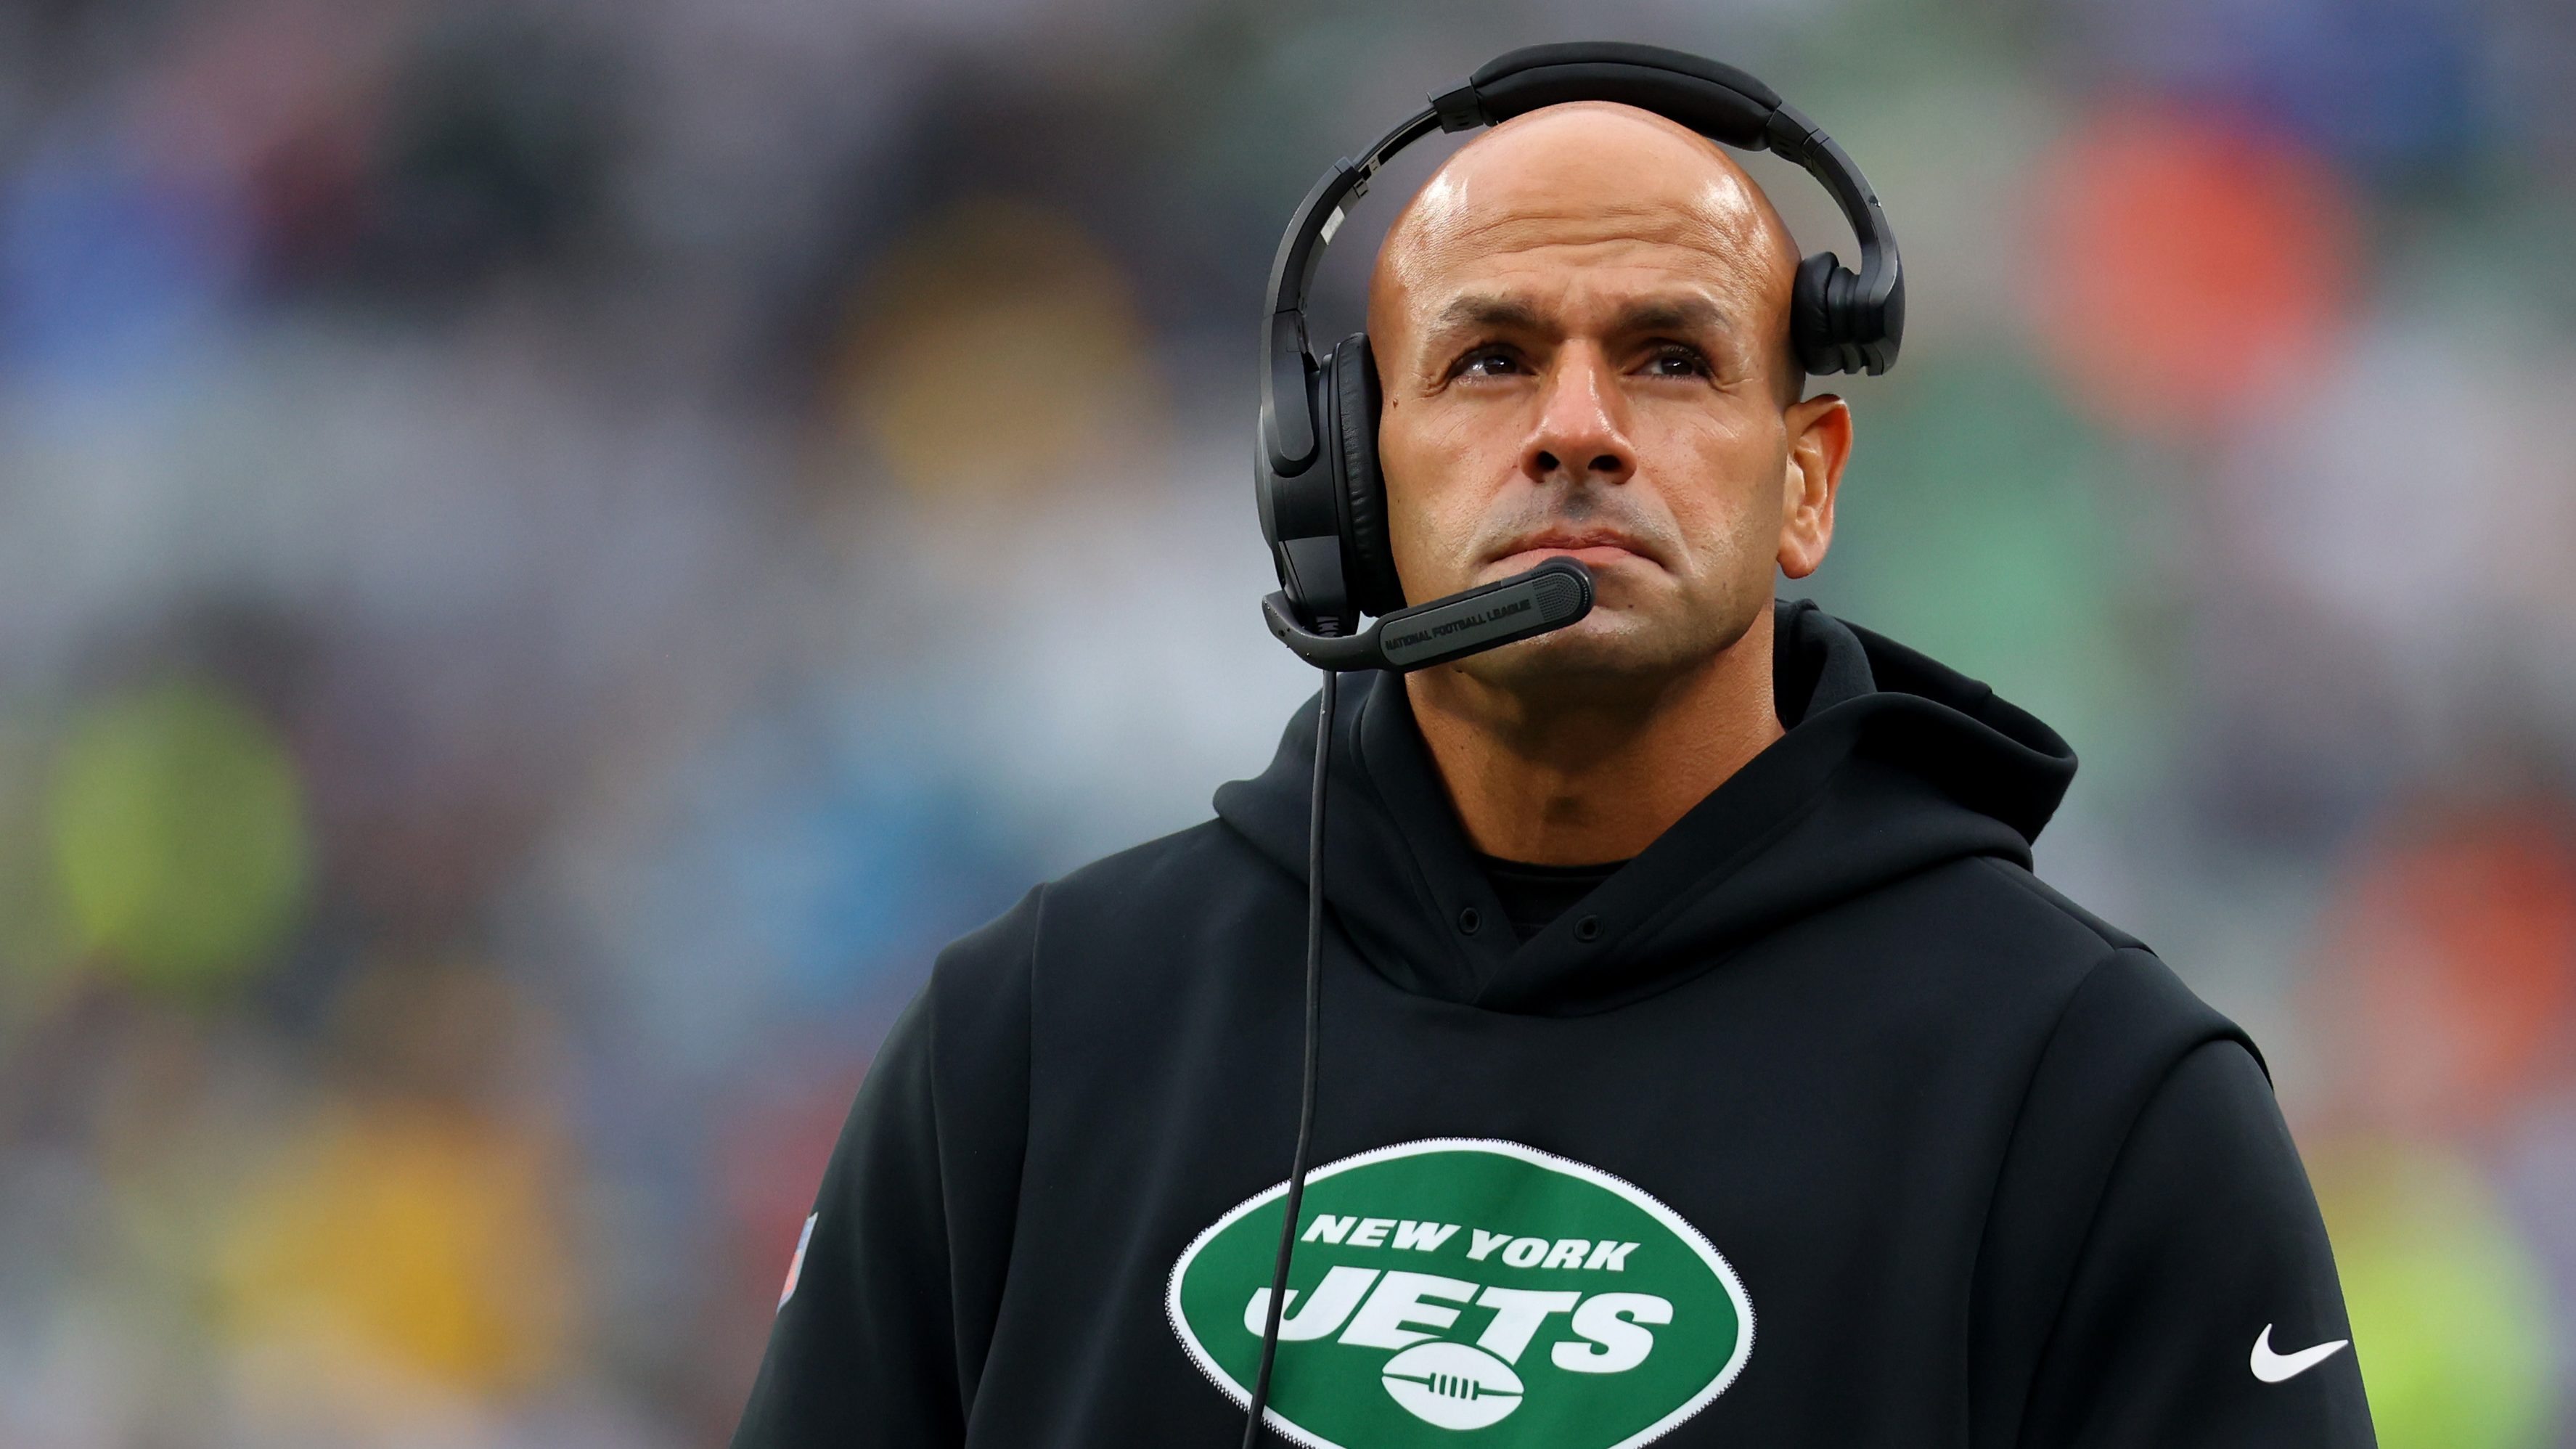 Nov 27, 2022; East Rutherford, New Jersey, USA; New York Jets head coach Robert Saleh looks on during the second half against the Chicago Bears at MetLife Stadium. Mandatory Credit: Vincent Carchietta-USA TODAY Sports